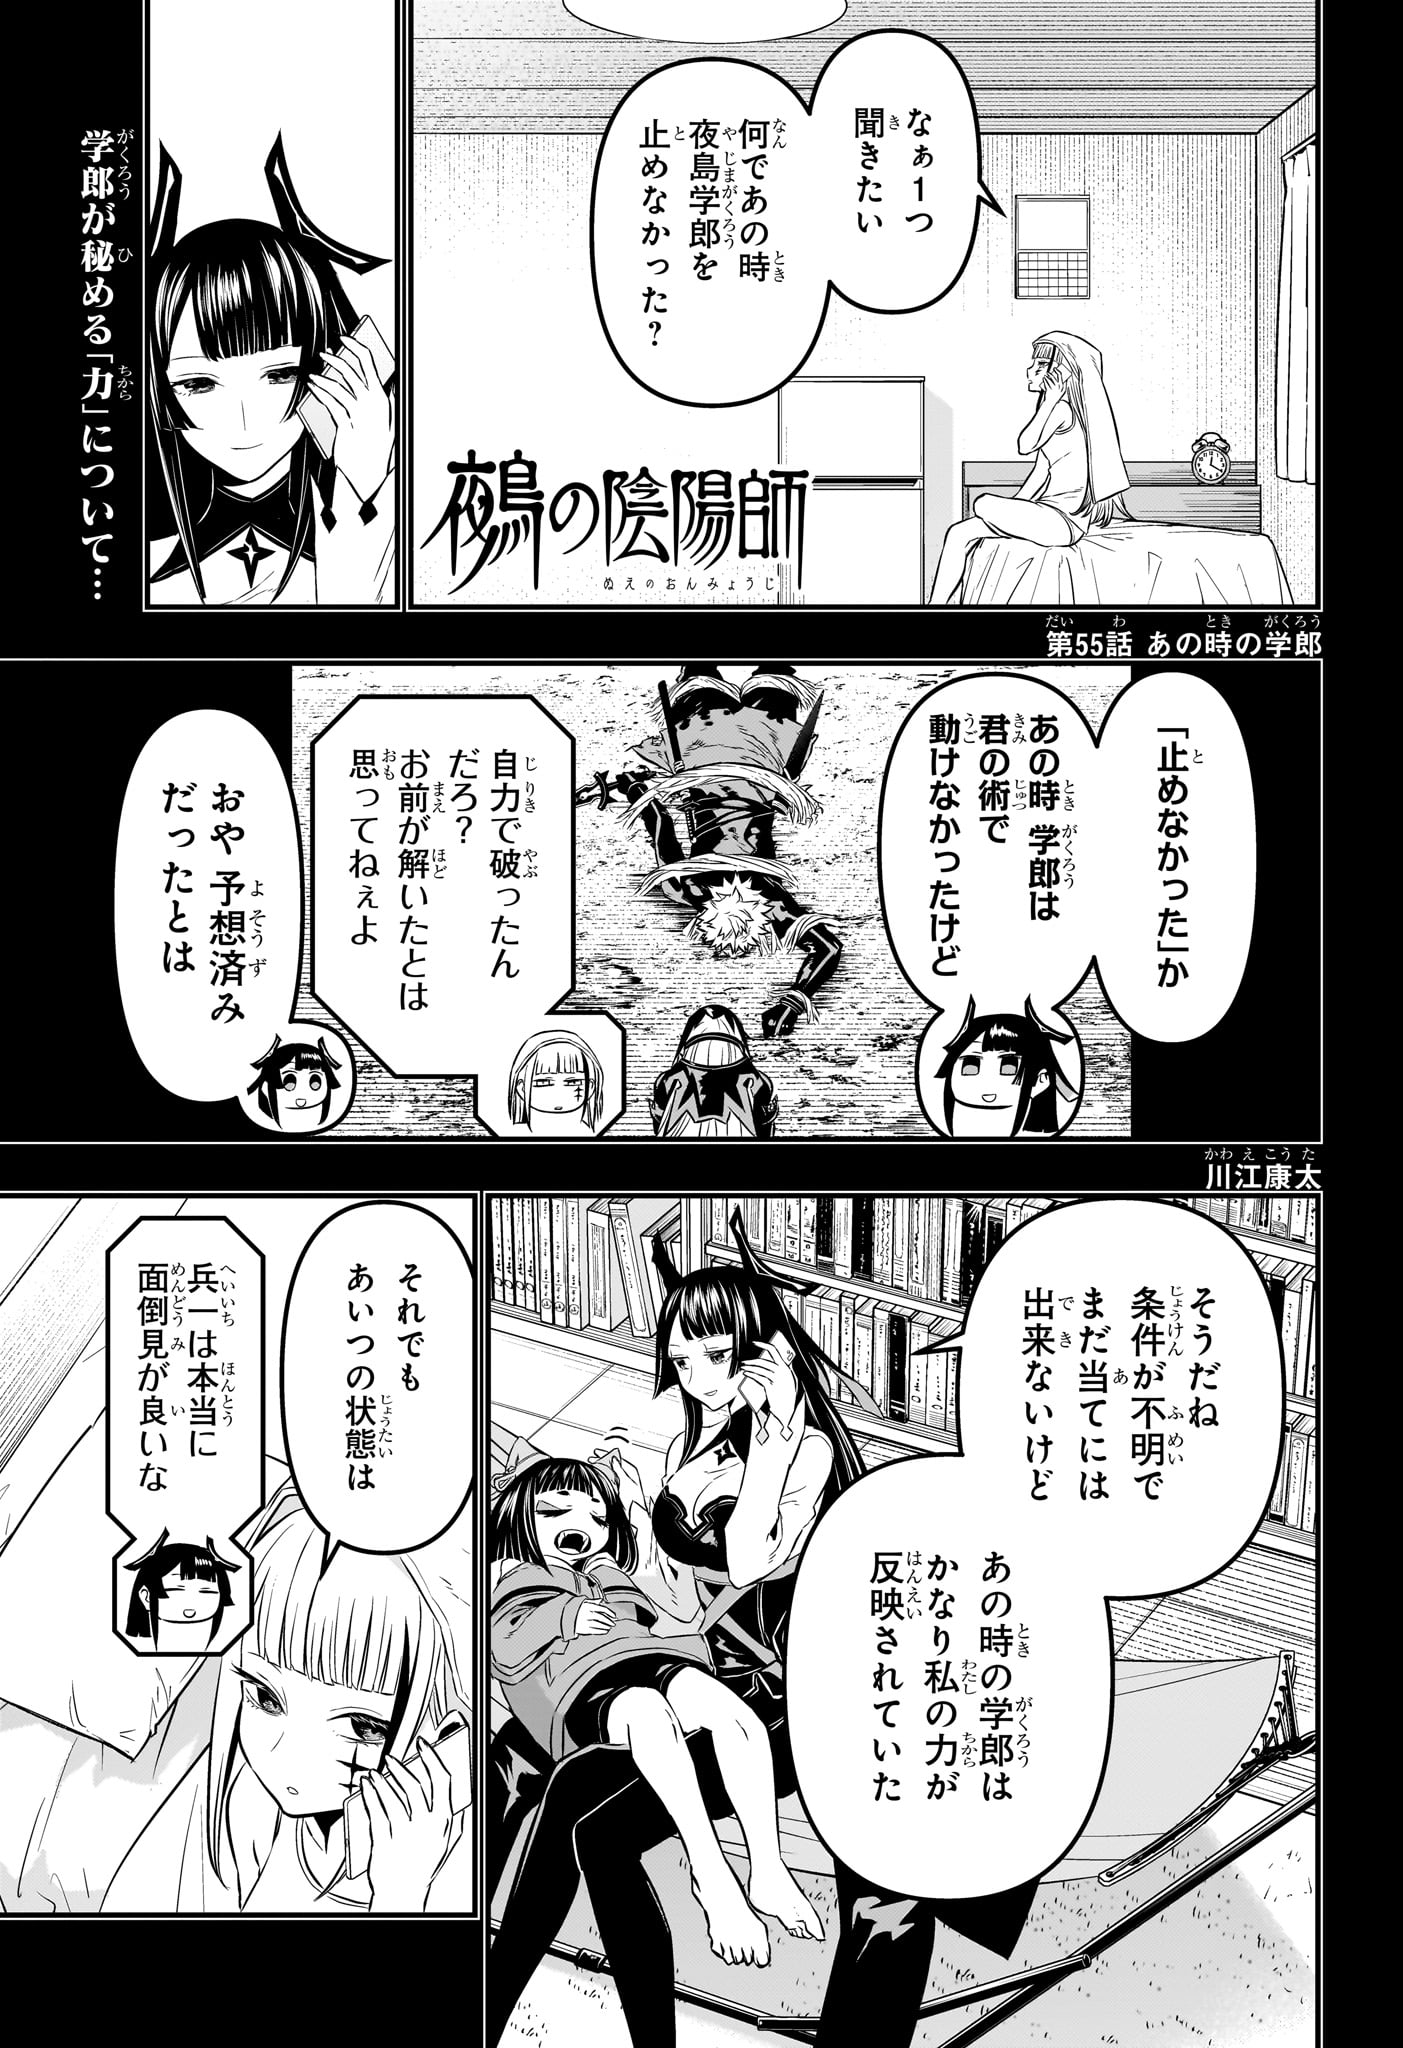 Nue no Onmyouji - Chapter 55 - Page 1